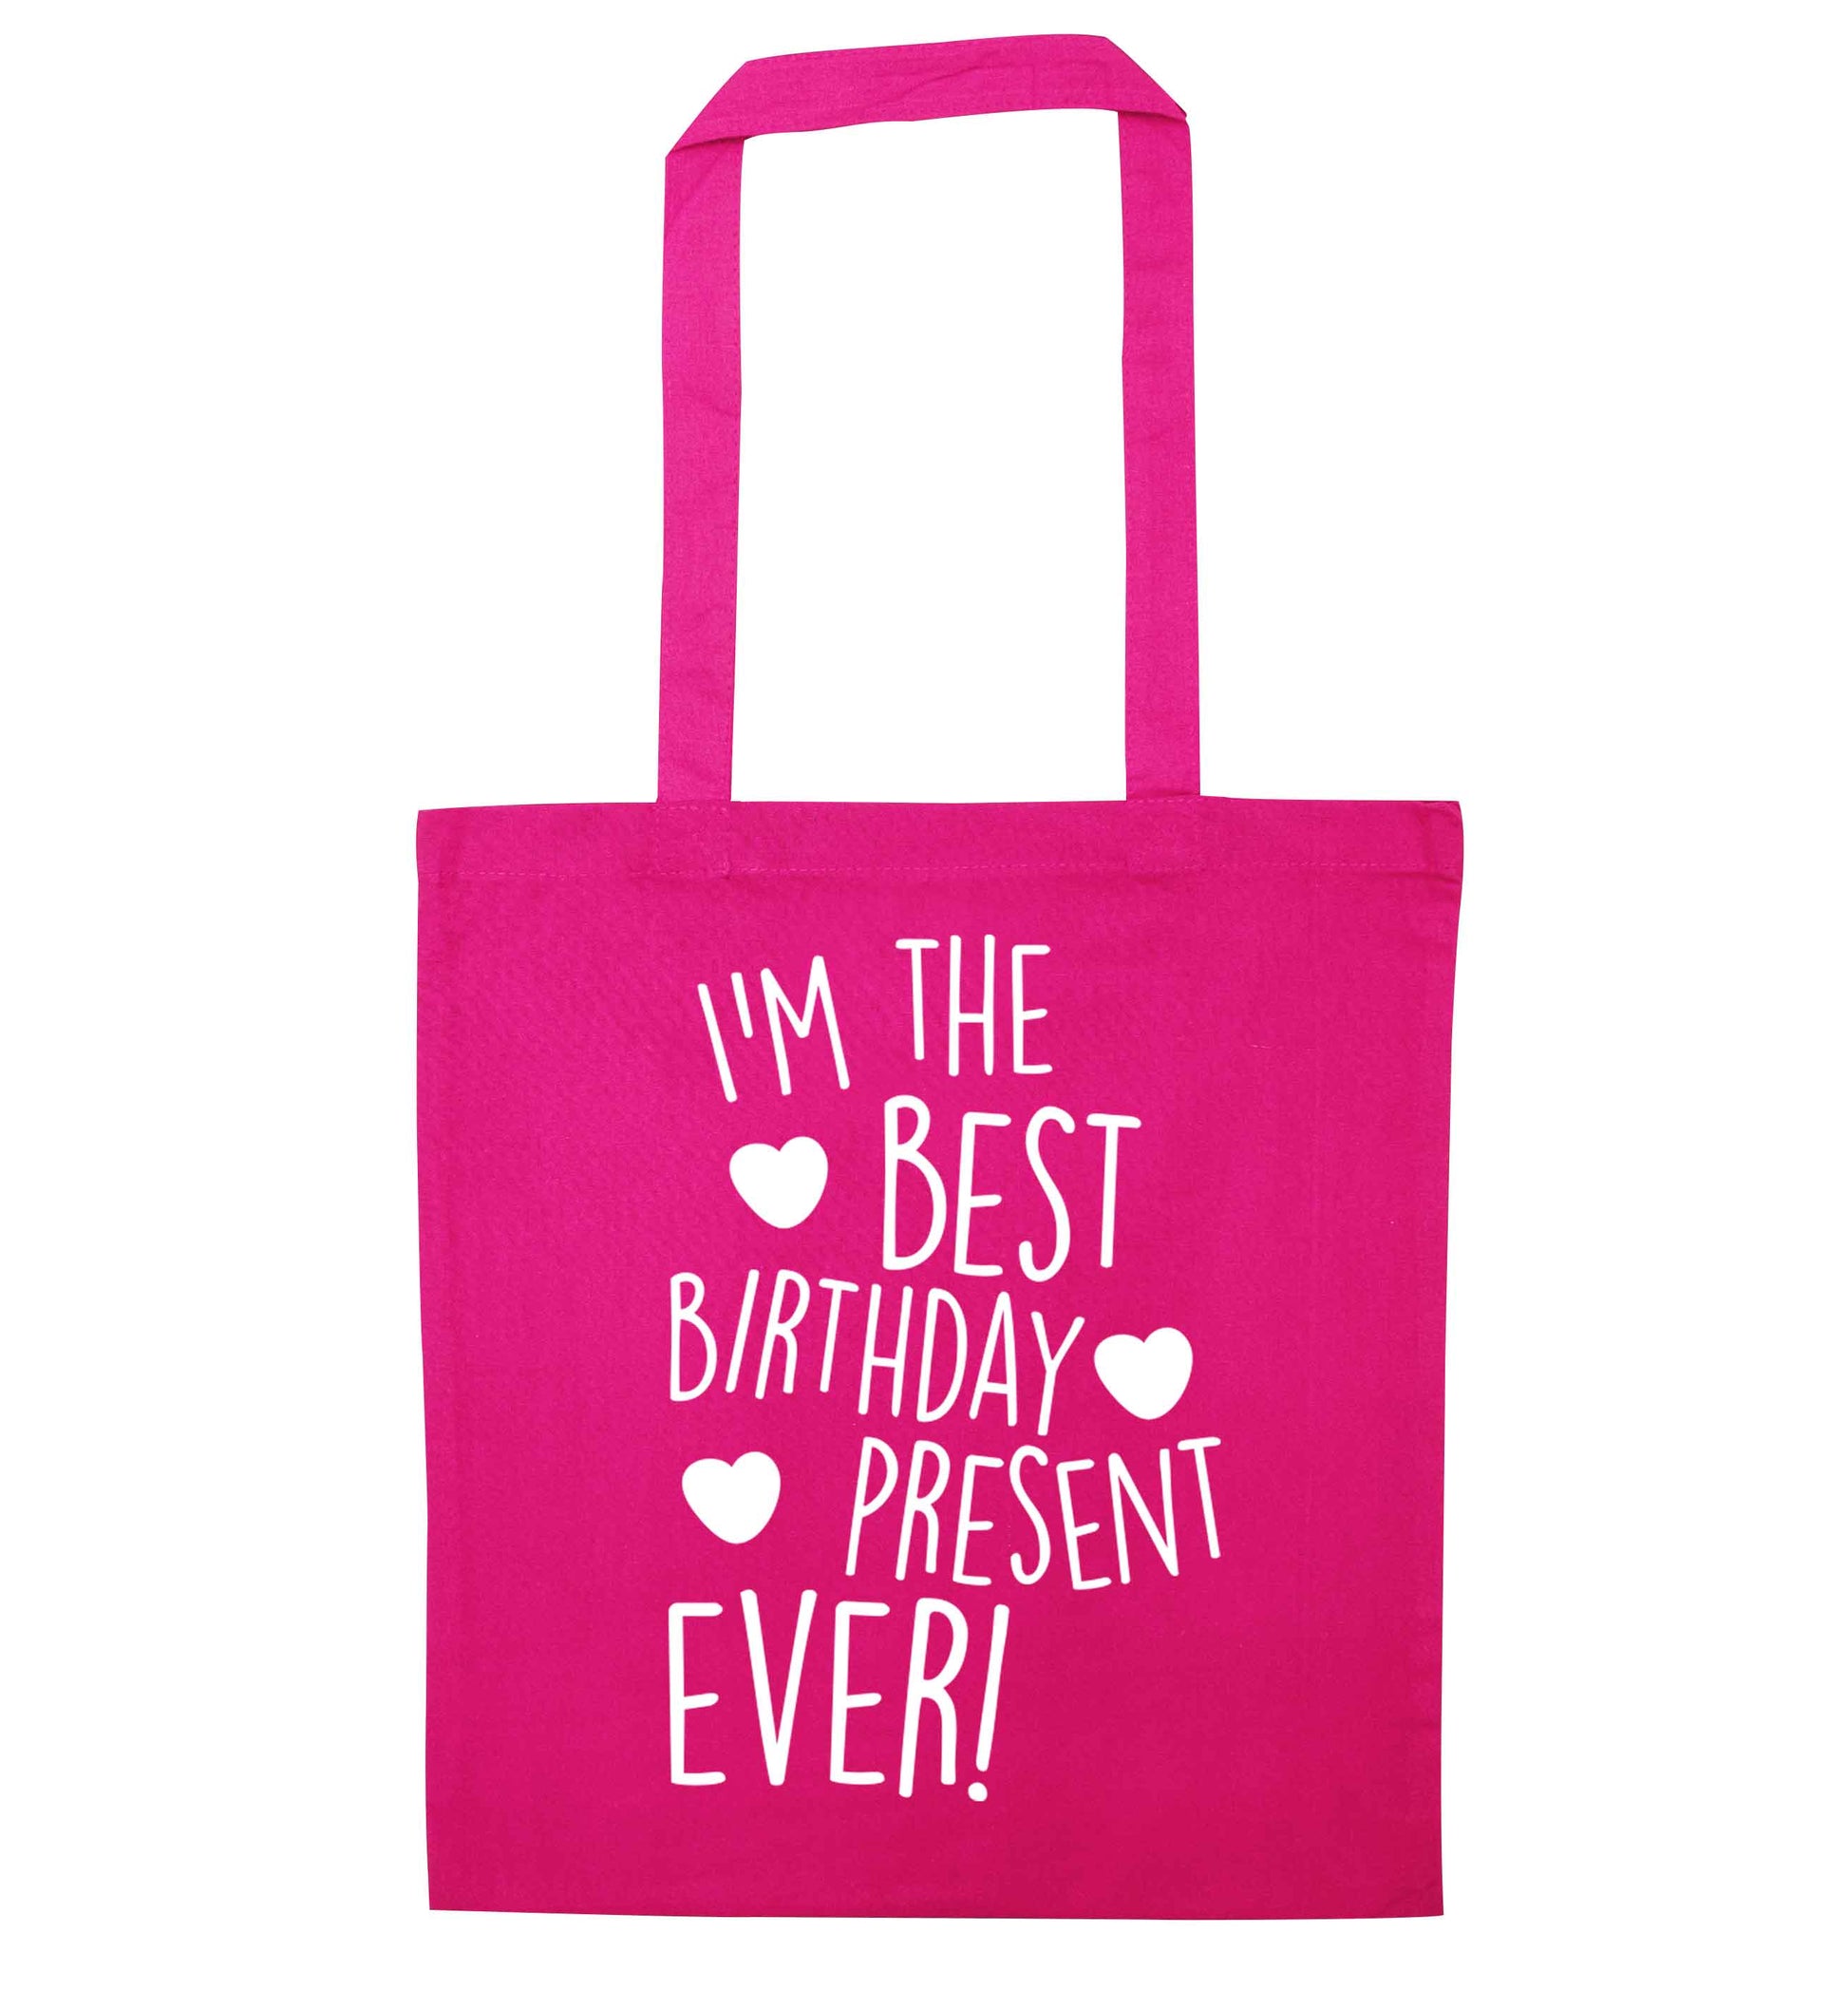 I'm the best birthday present ever pink tote bag